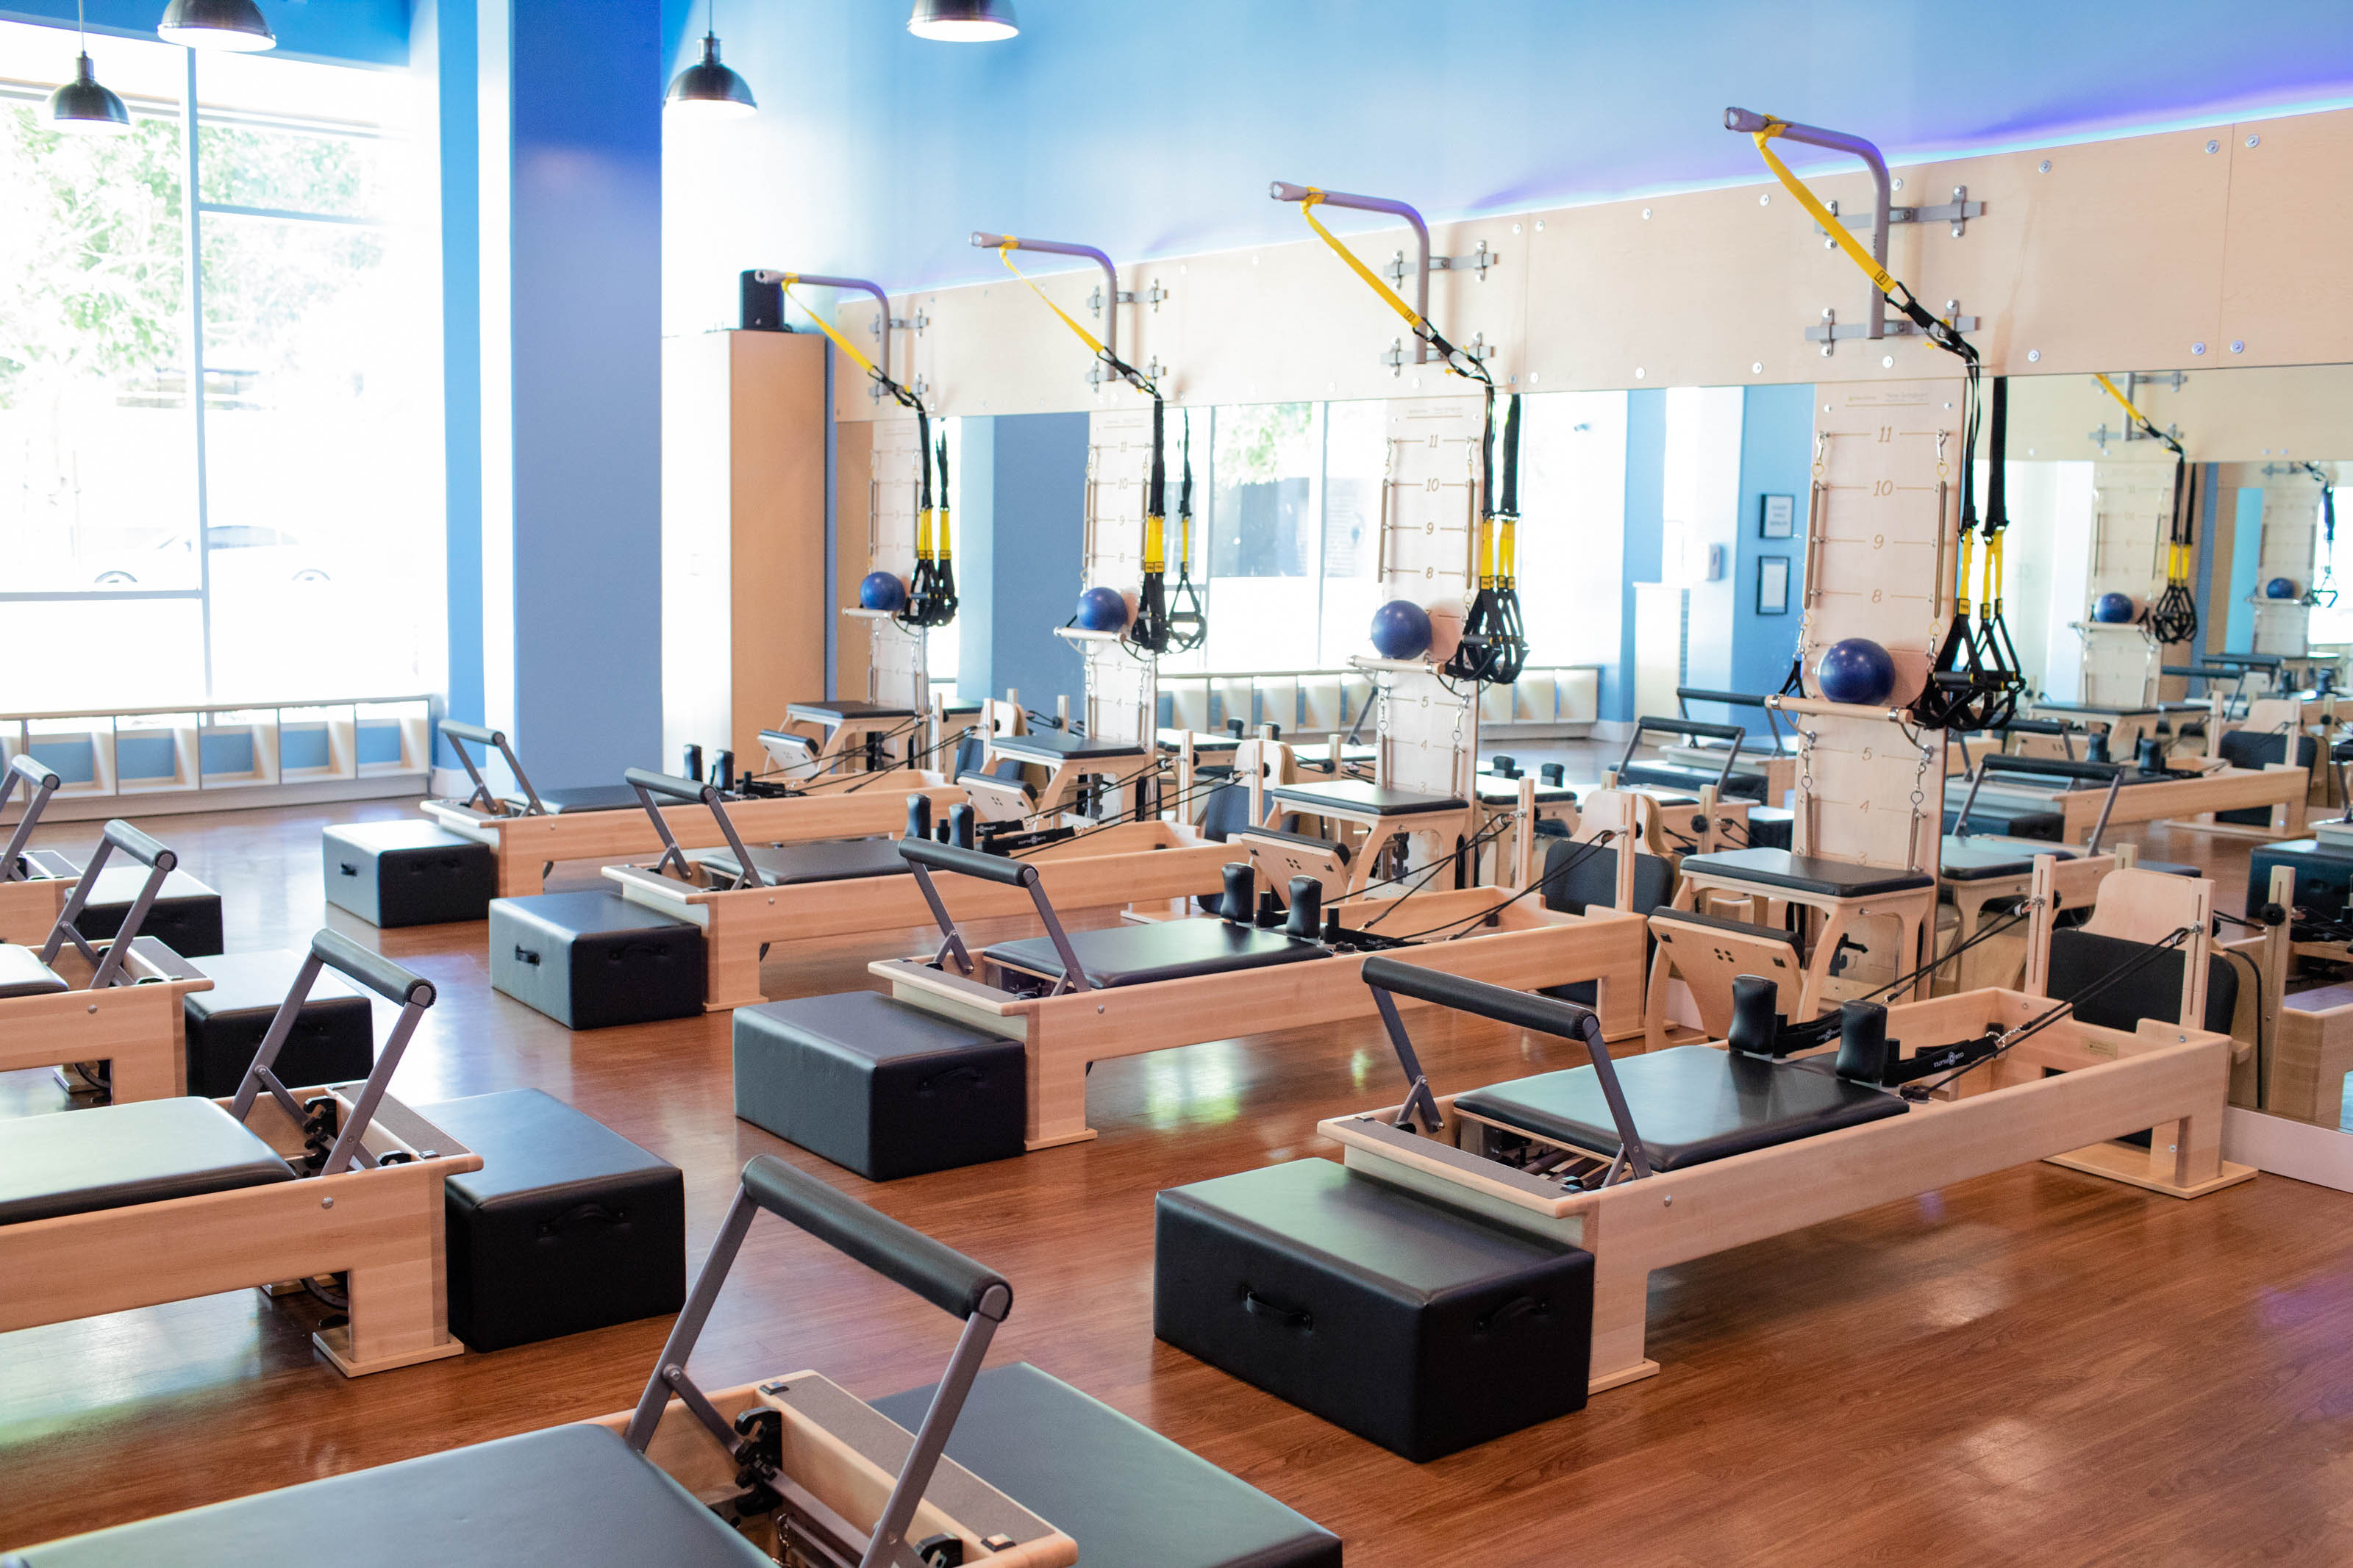 Pilates for Beginners: Know Your Equipment, Blog